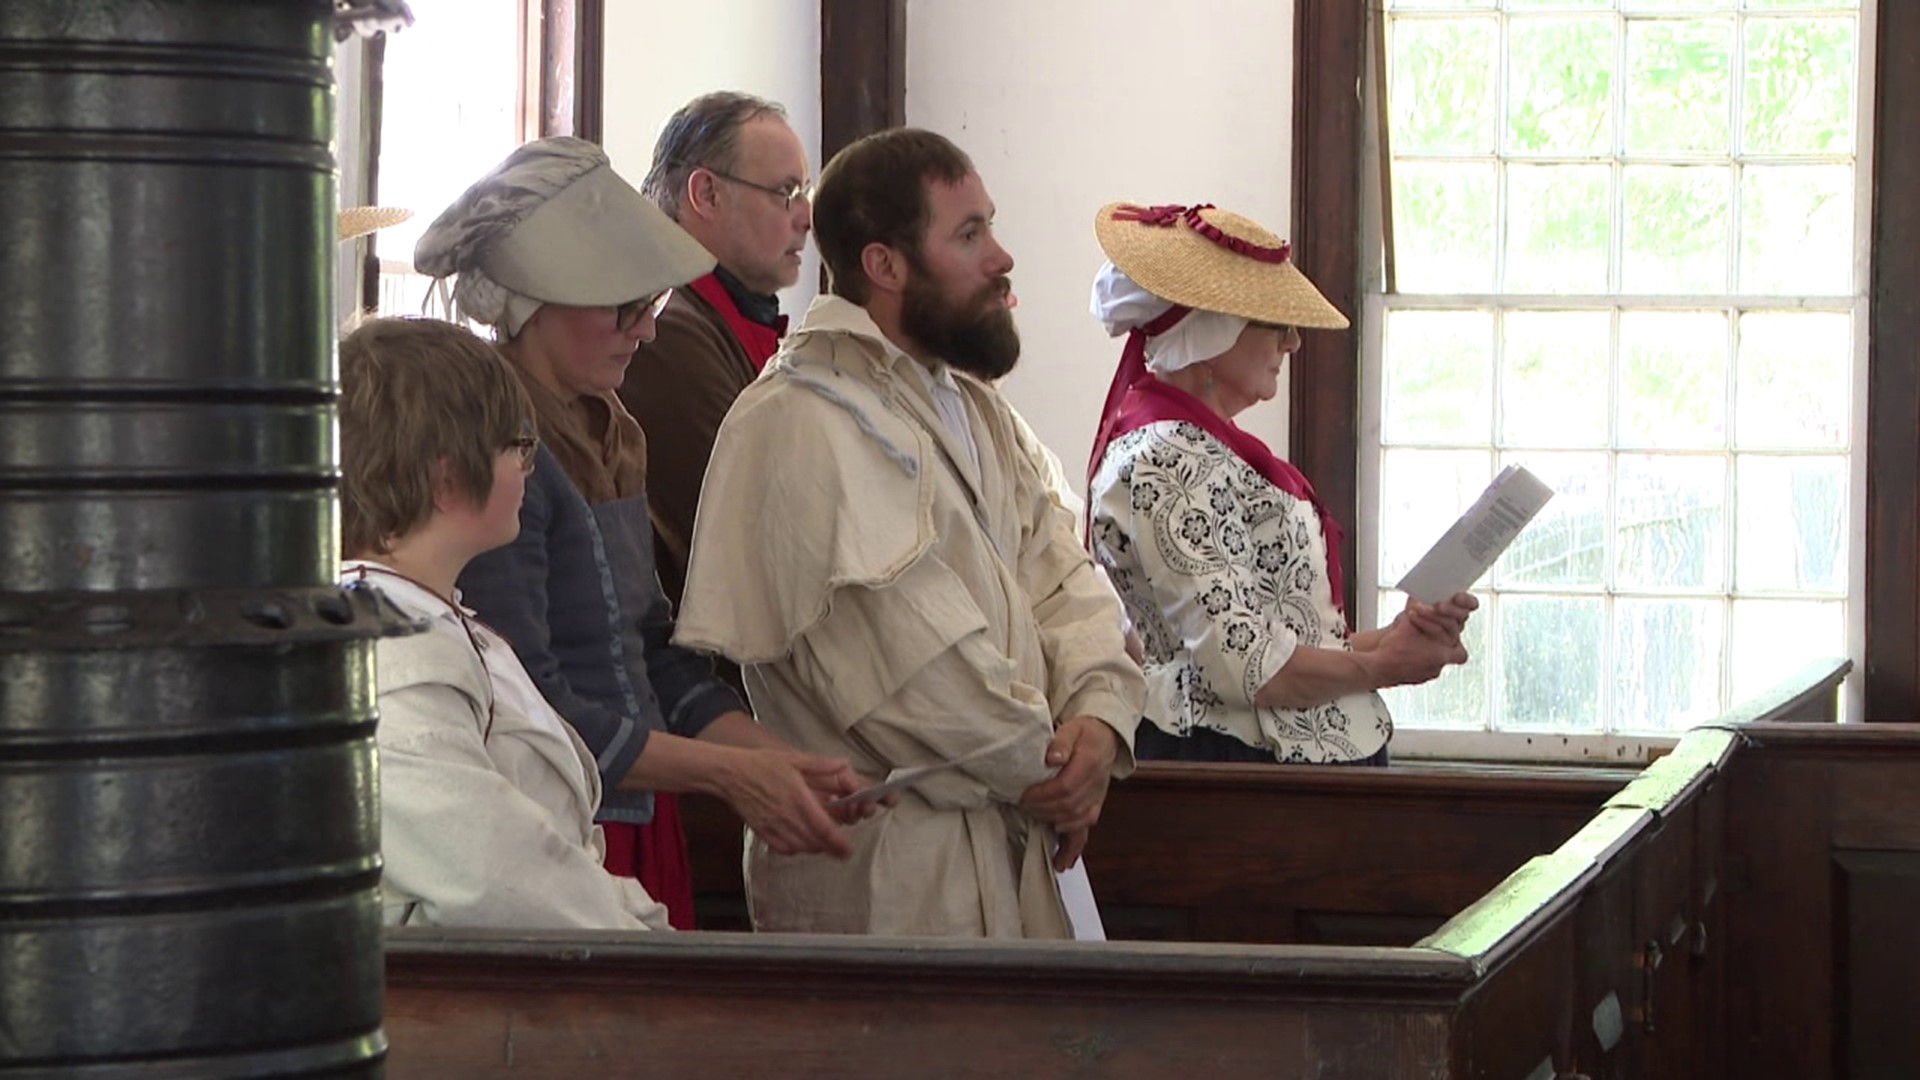 The event was held at the Forty Fort Meeting House Sunday afternoon.